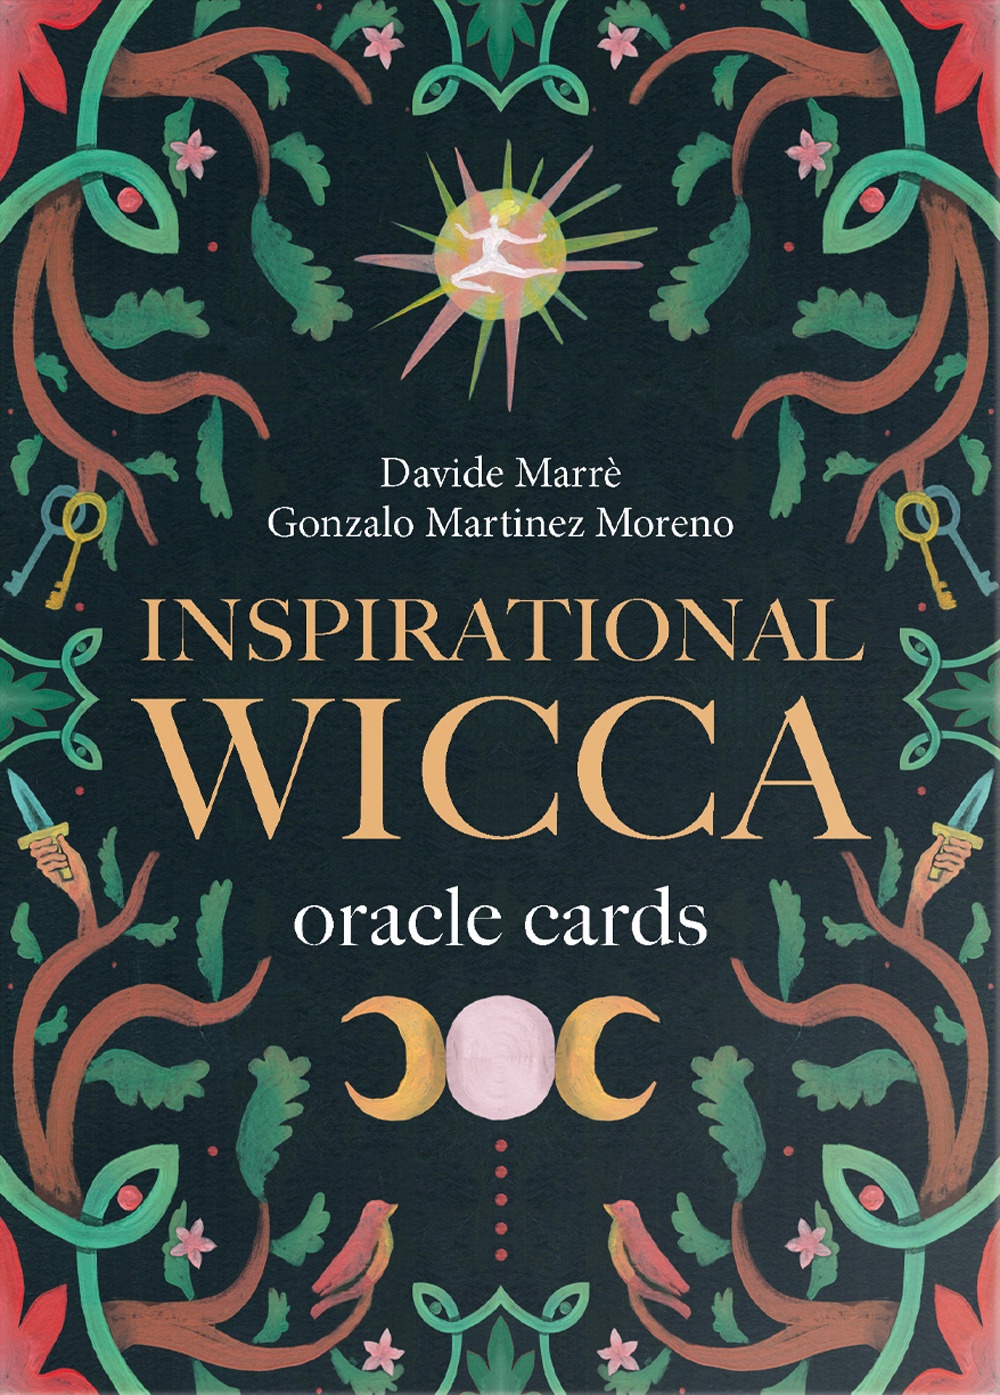 9788865278482 2023 - Inspirational wicca oracle cards 